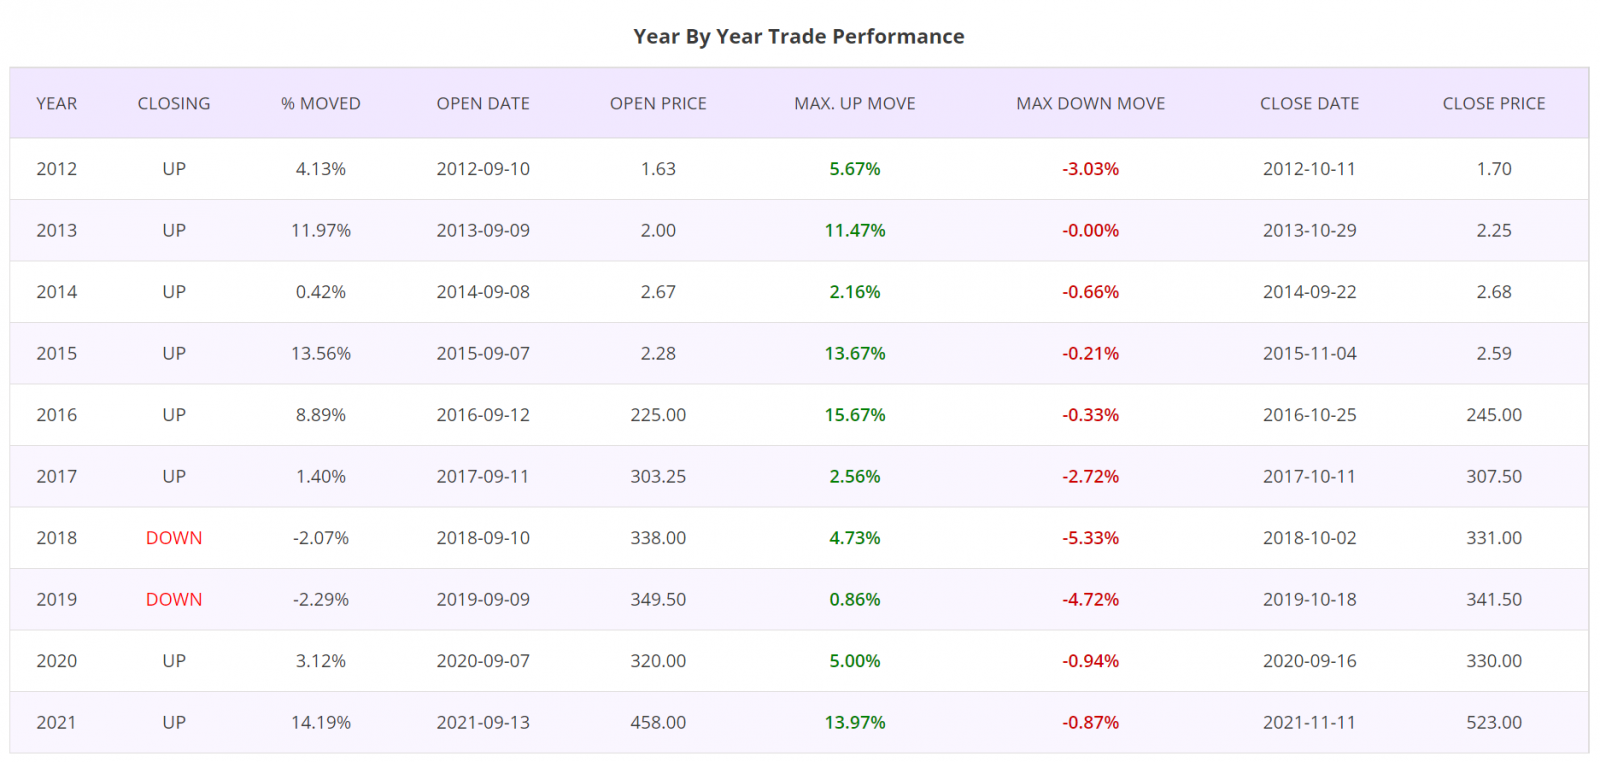 Seasonality trading strategy, detailed report, year by year trade performance, UK stocks